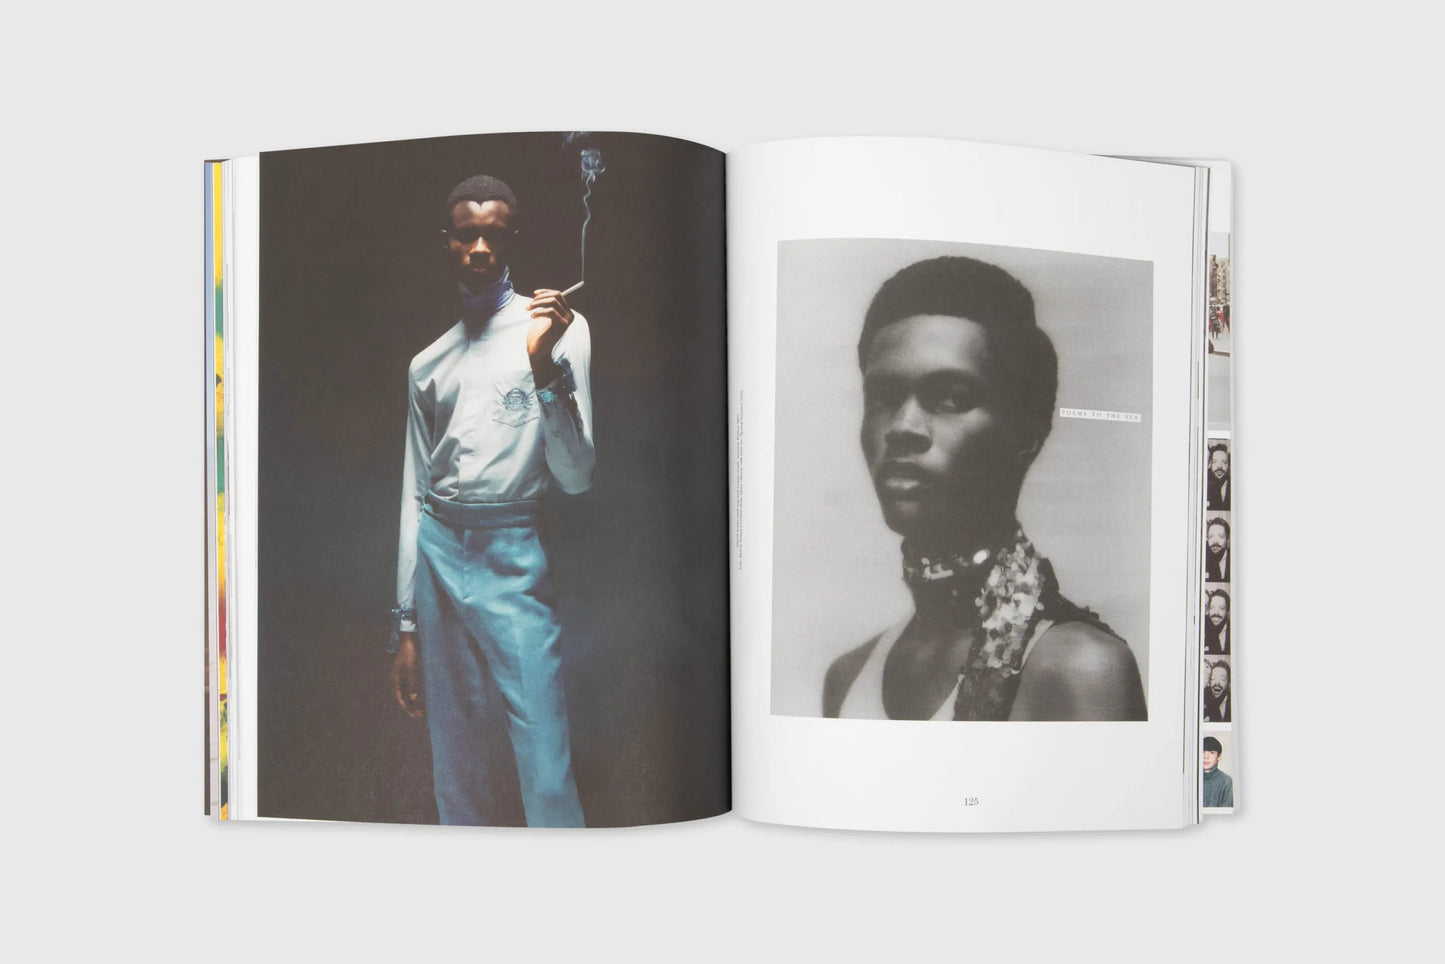 A Magazine 24: Curated by ERDEM